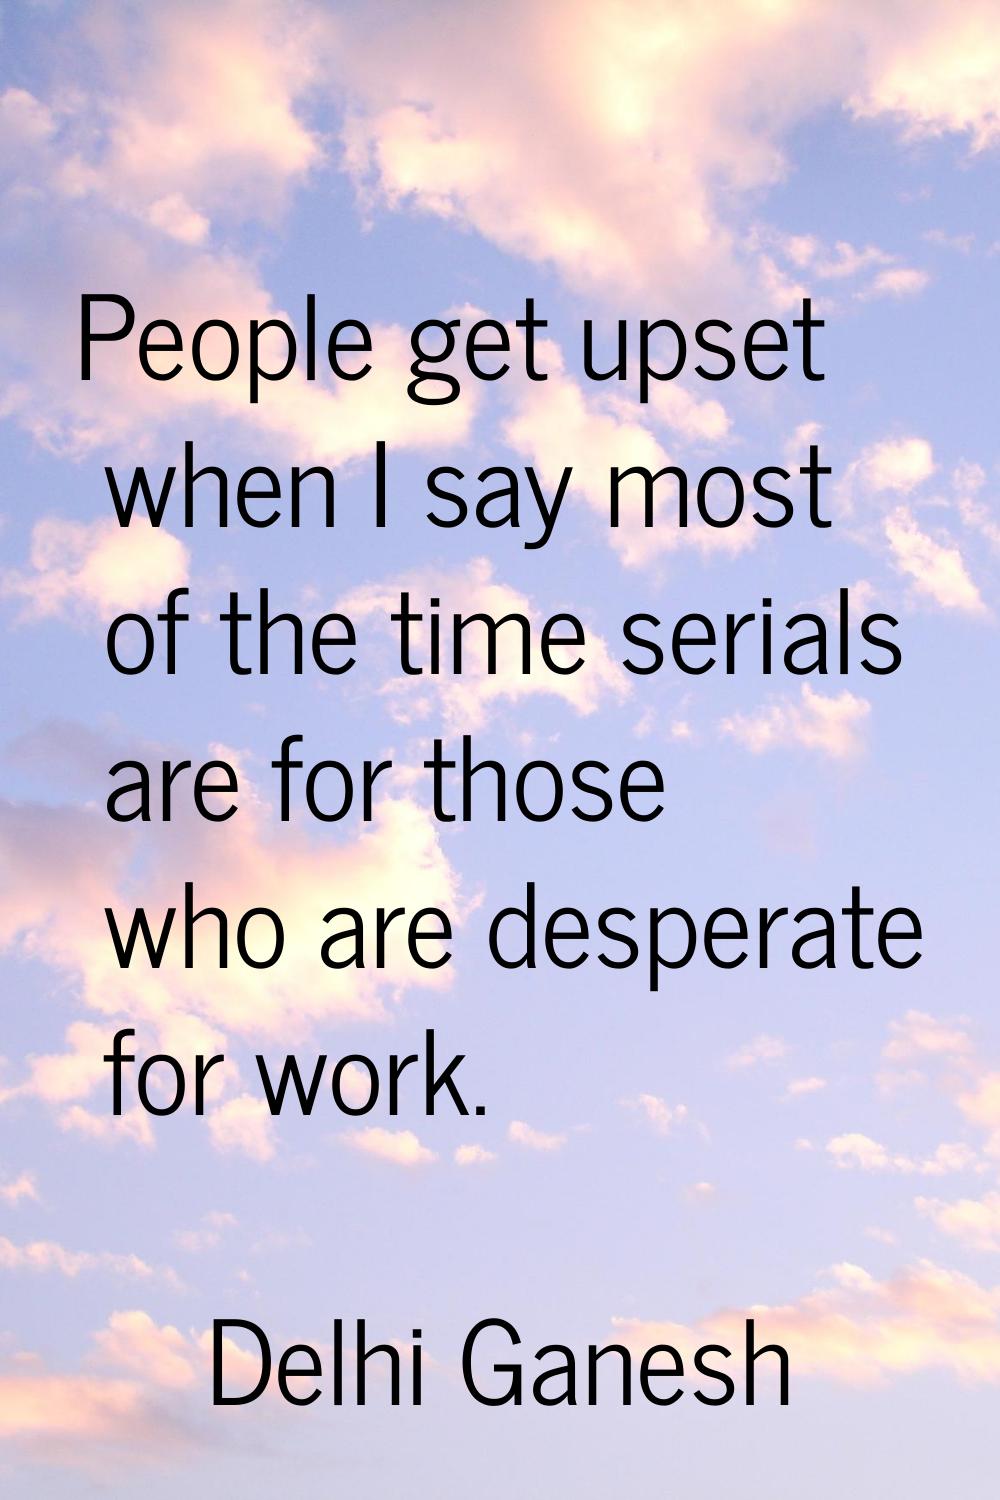 People get upset when I say most of the time serials are for those who are desperate for work.